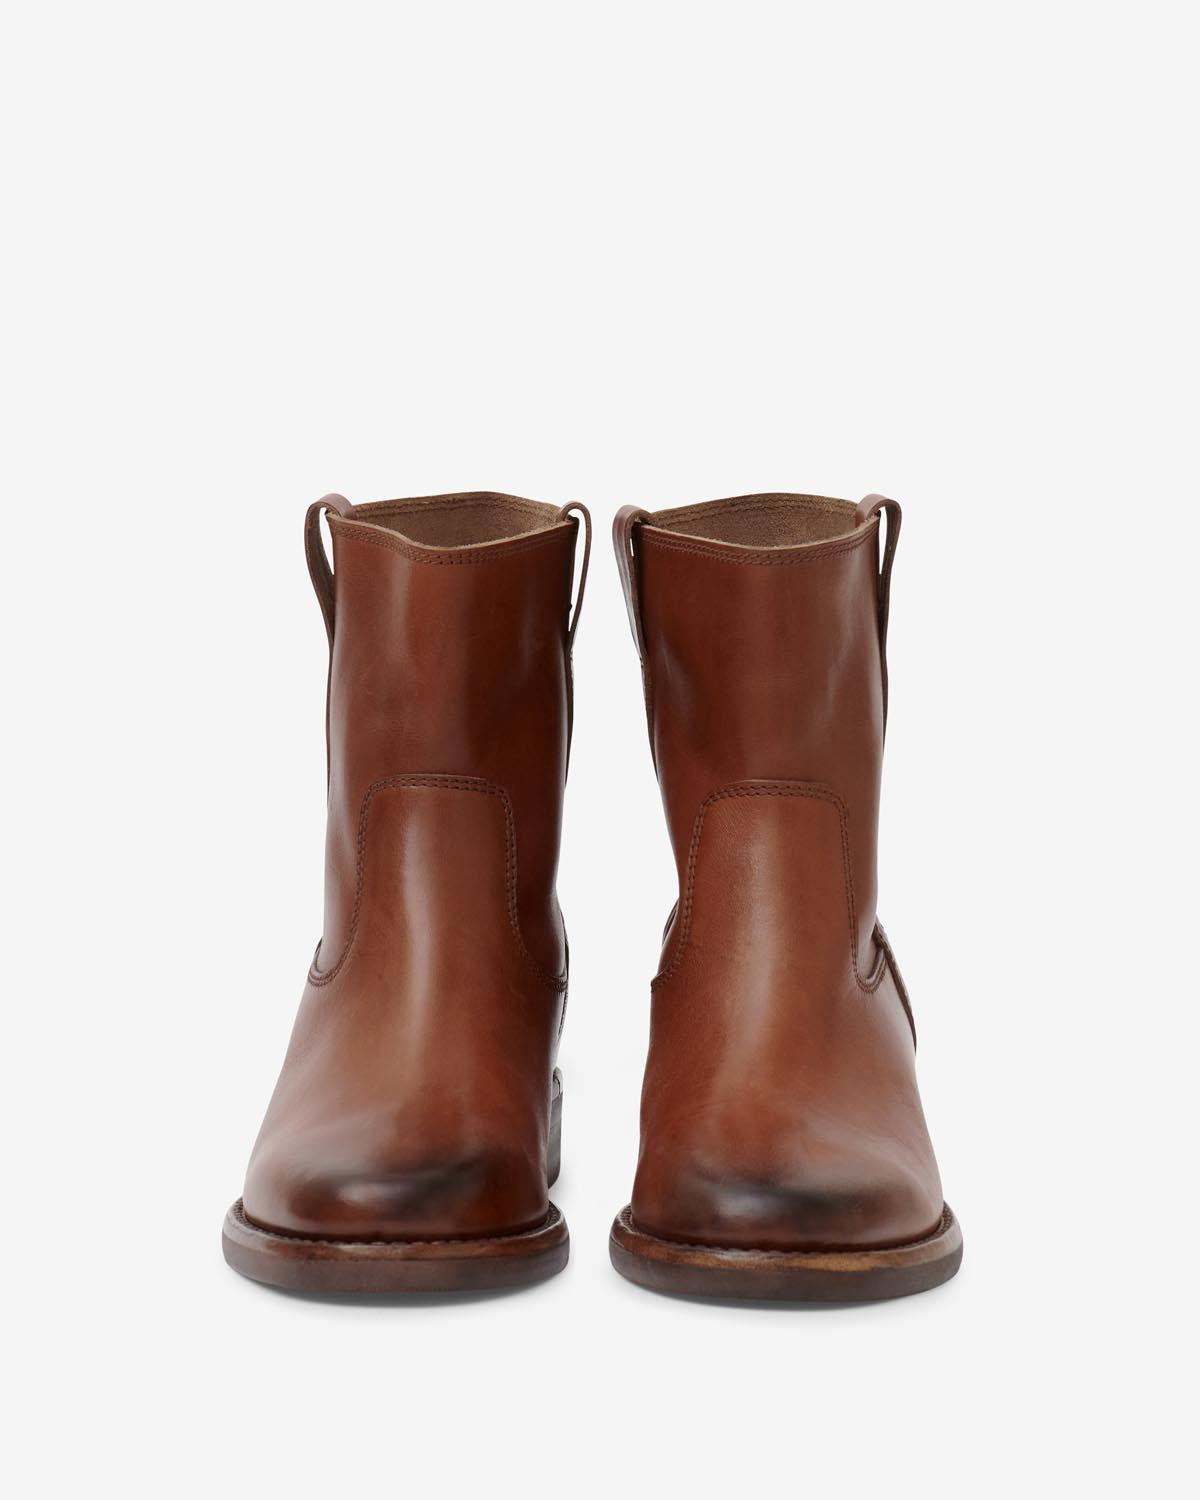 Boots susee Woman Cognac 3